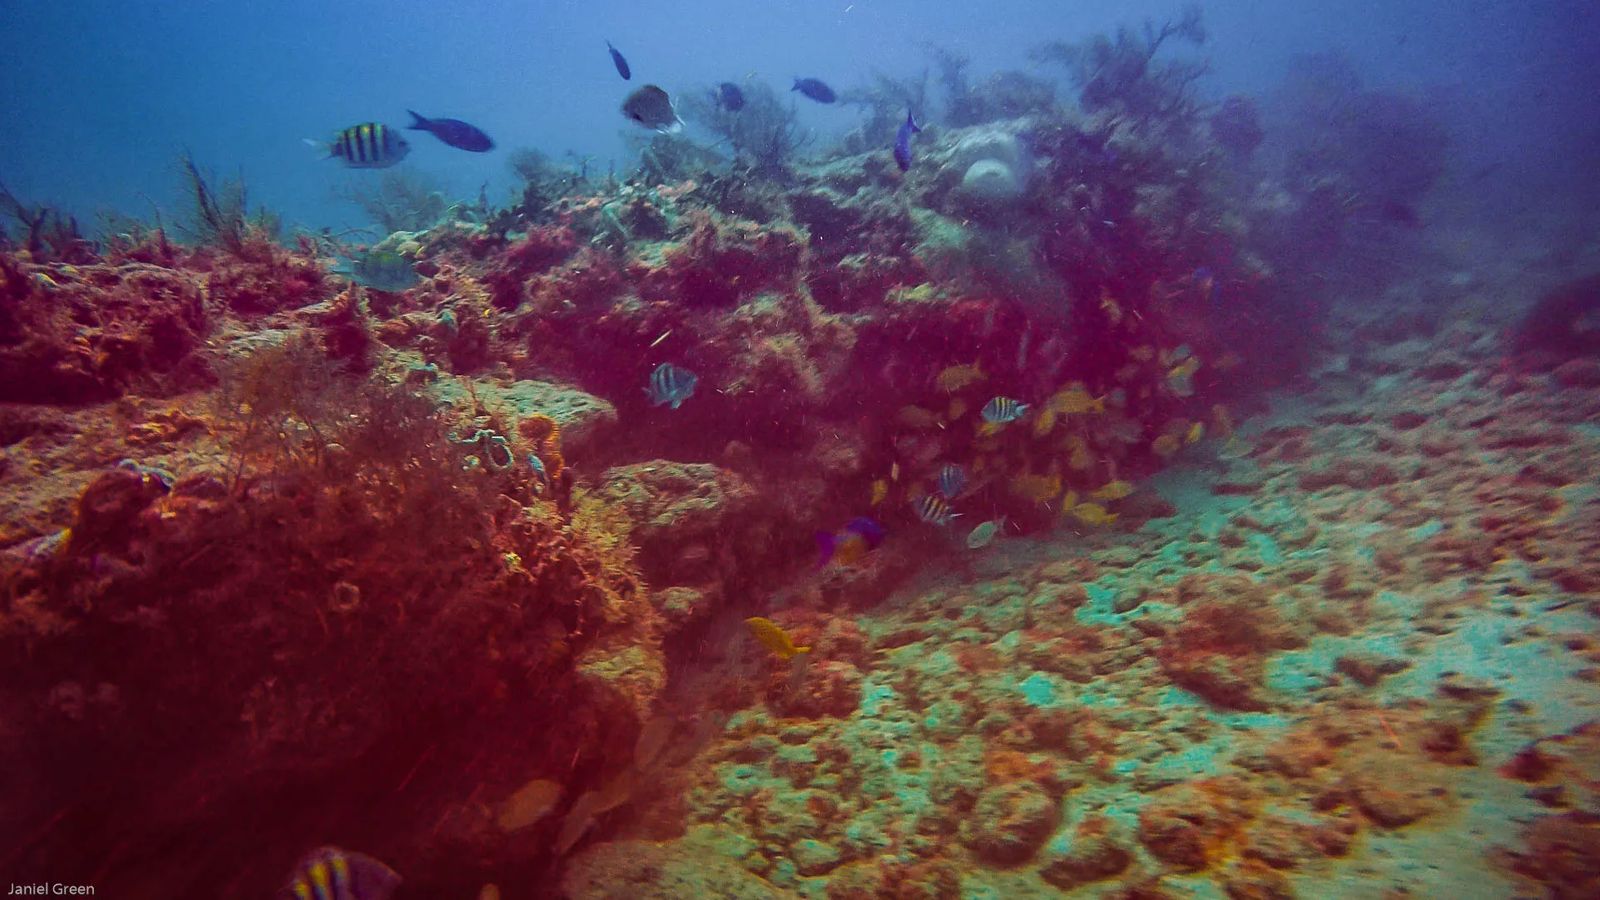 The Trench with barrel coral, multiple fish, some yellow, some striped, hiding among the coral from the scuba diver. 